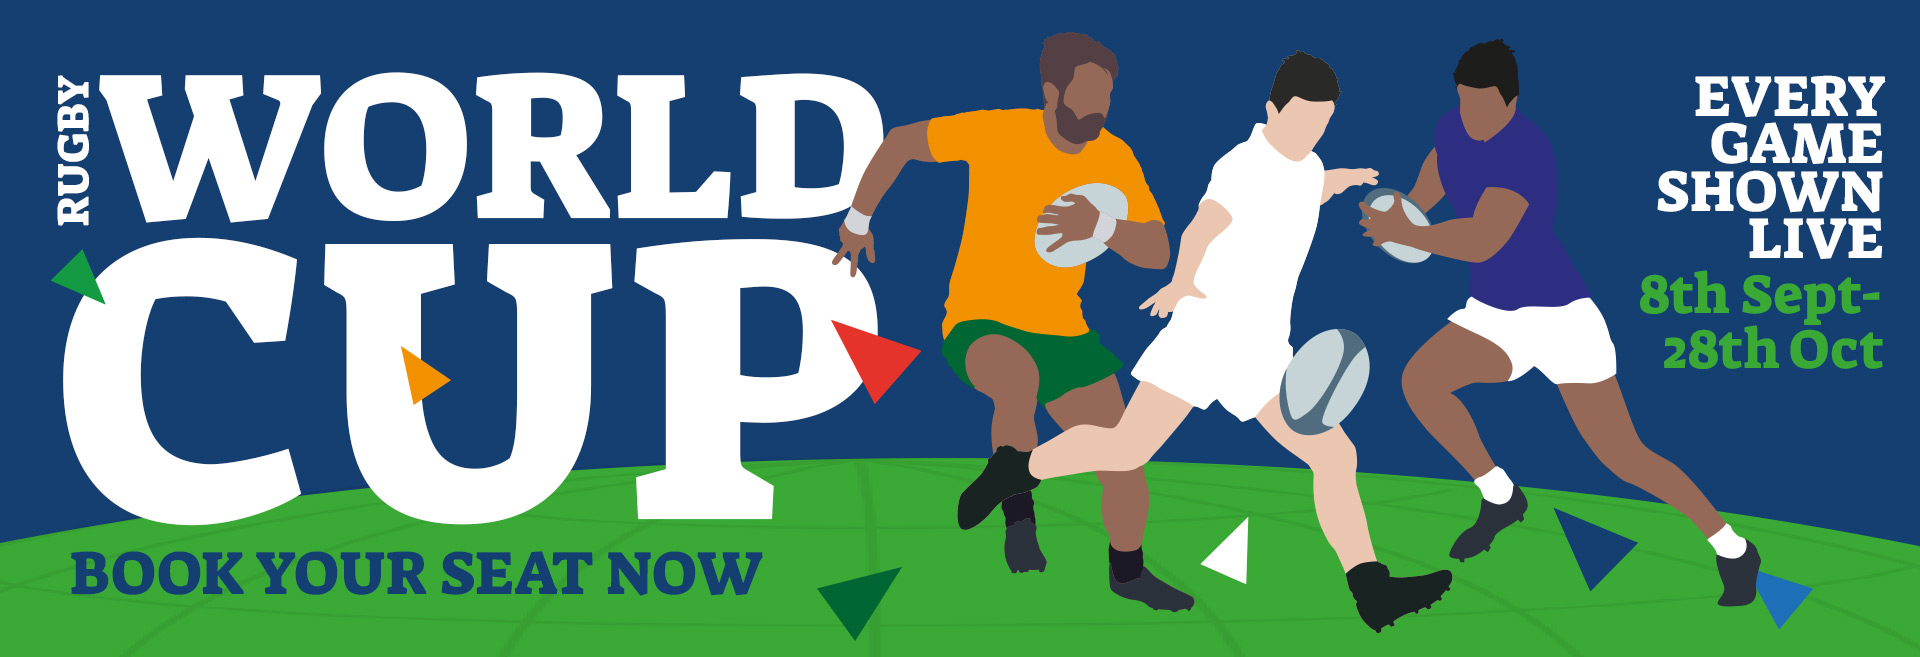 Watch the Rugby World Cup at The Mitre